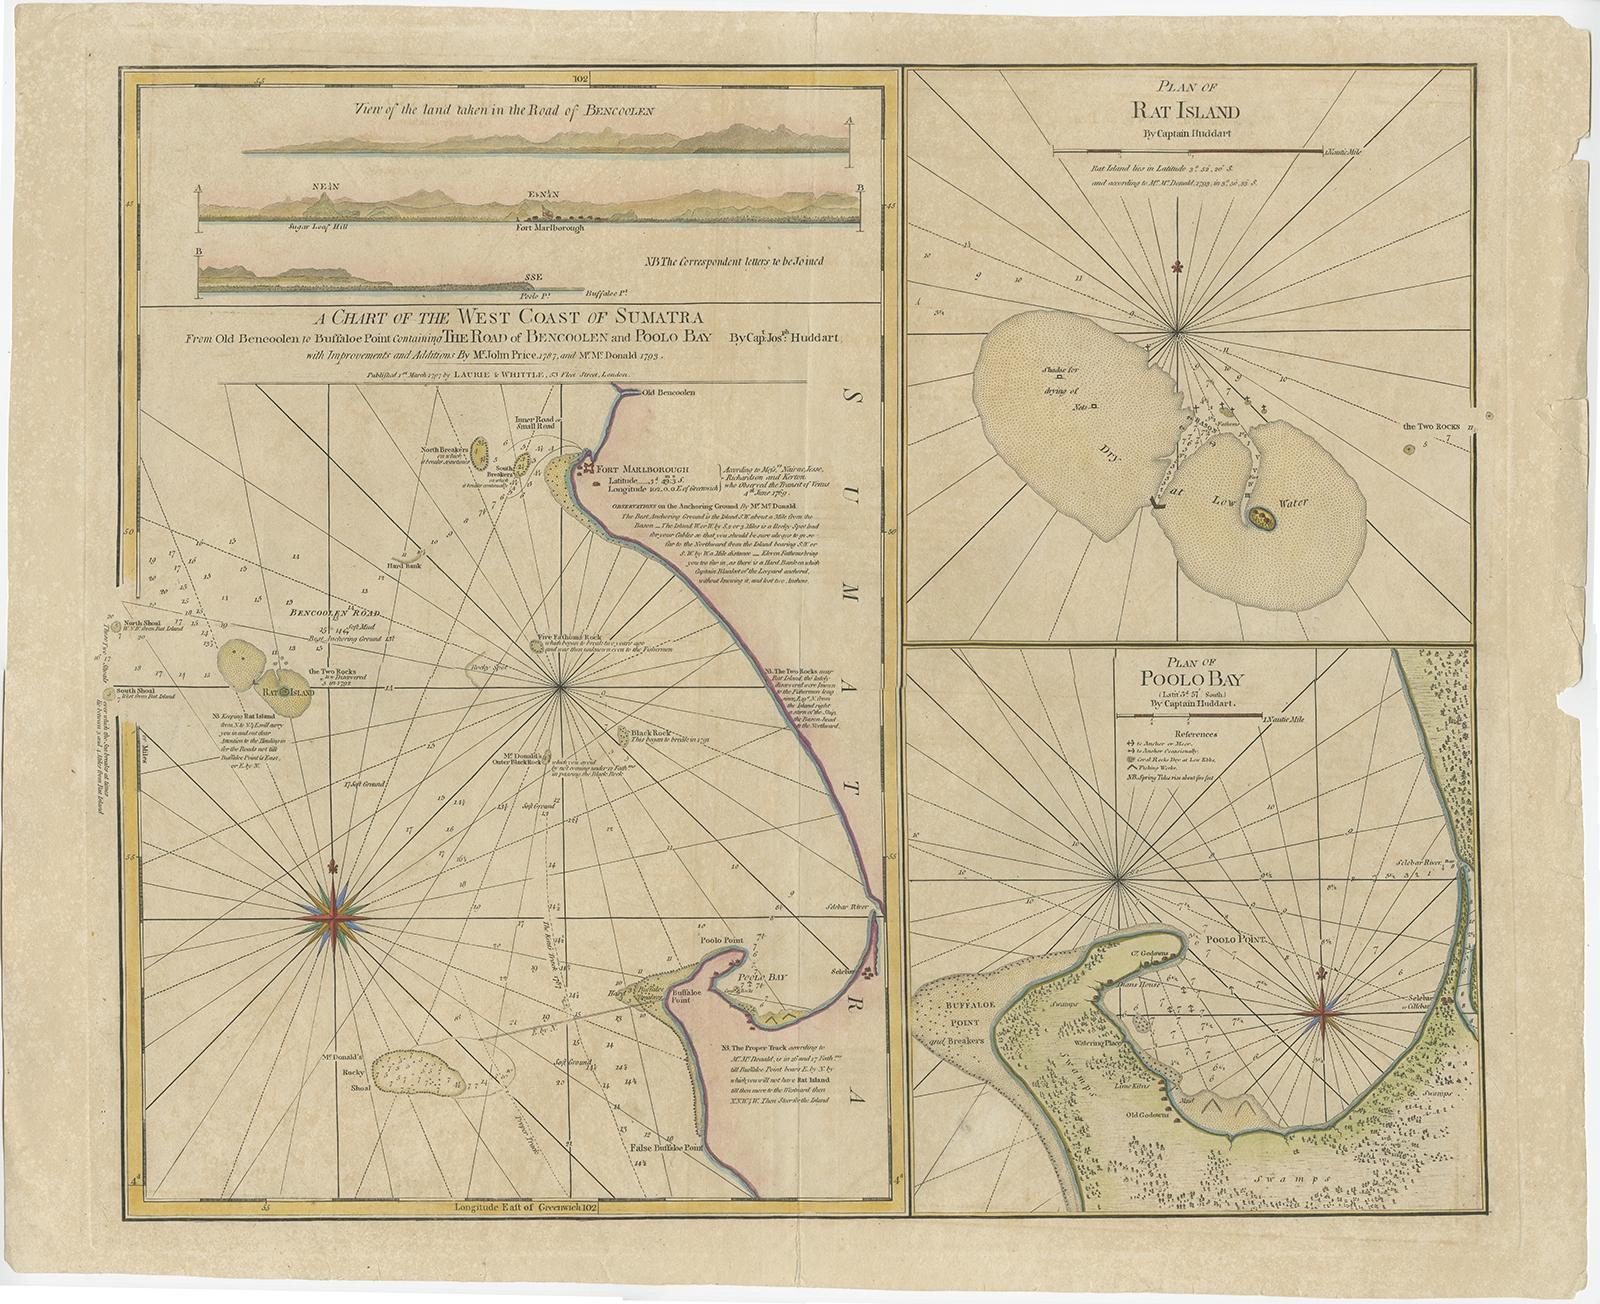 Antique map titled 'A Chart of the West Coast of Sumatra'. 

Early nautical chart identifying the British spice trading colony of Bencoolen and Fort Marlborough, Sumatra. The map is divided into three sections, the left hand side being a general